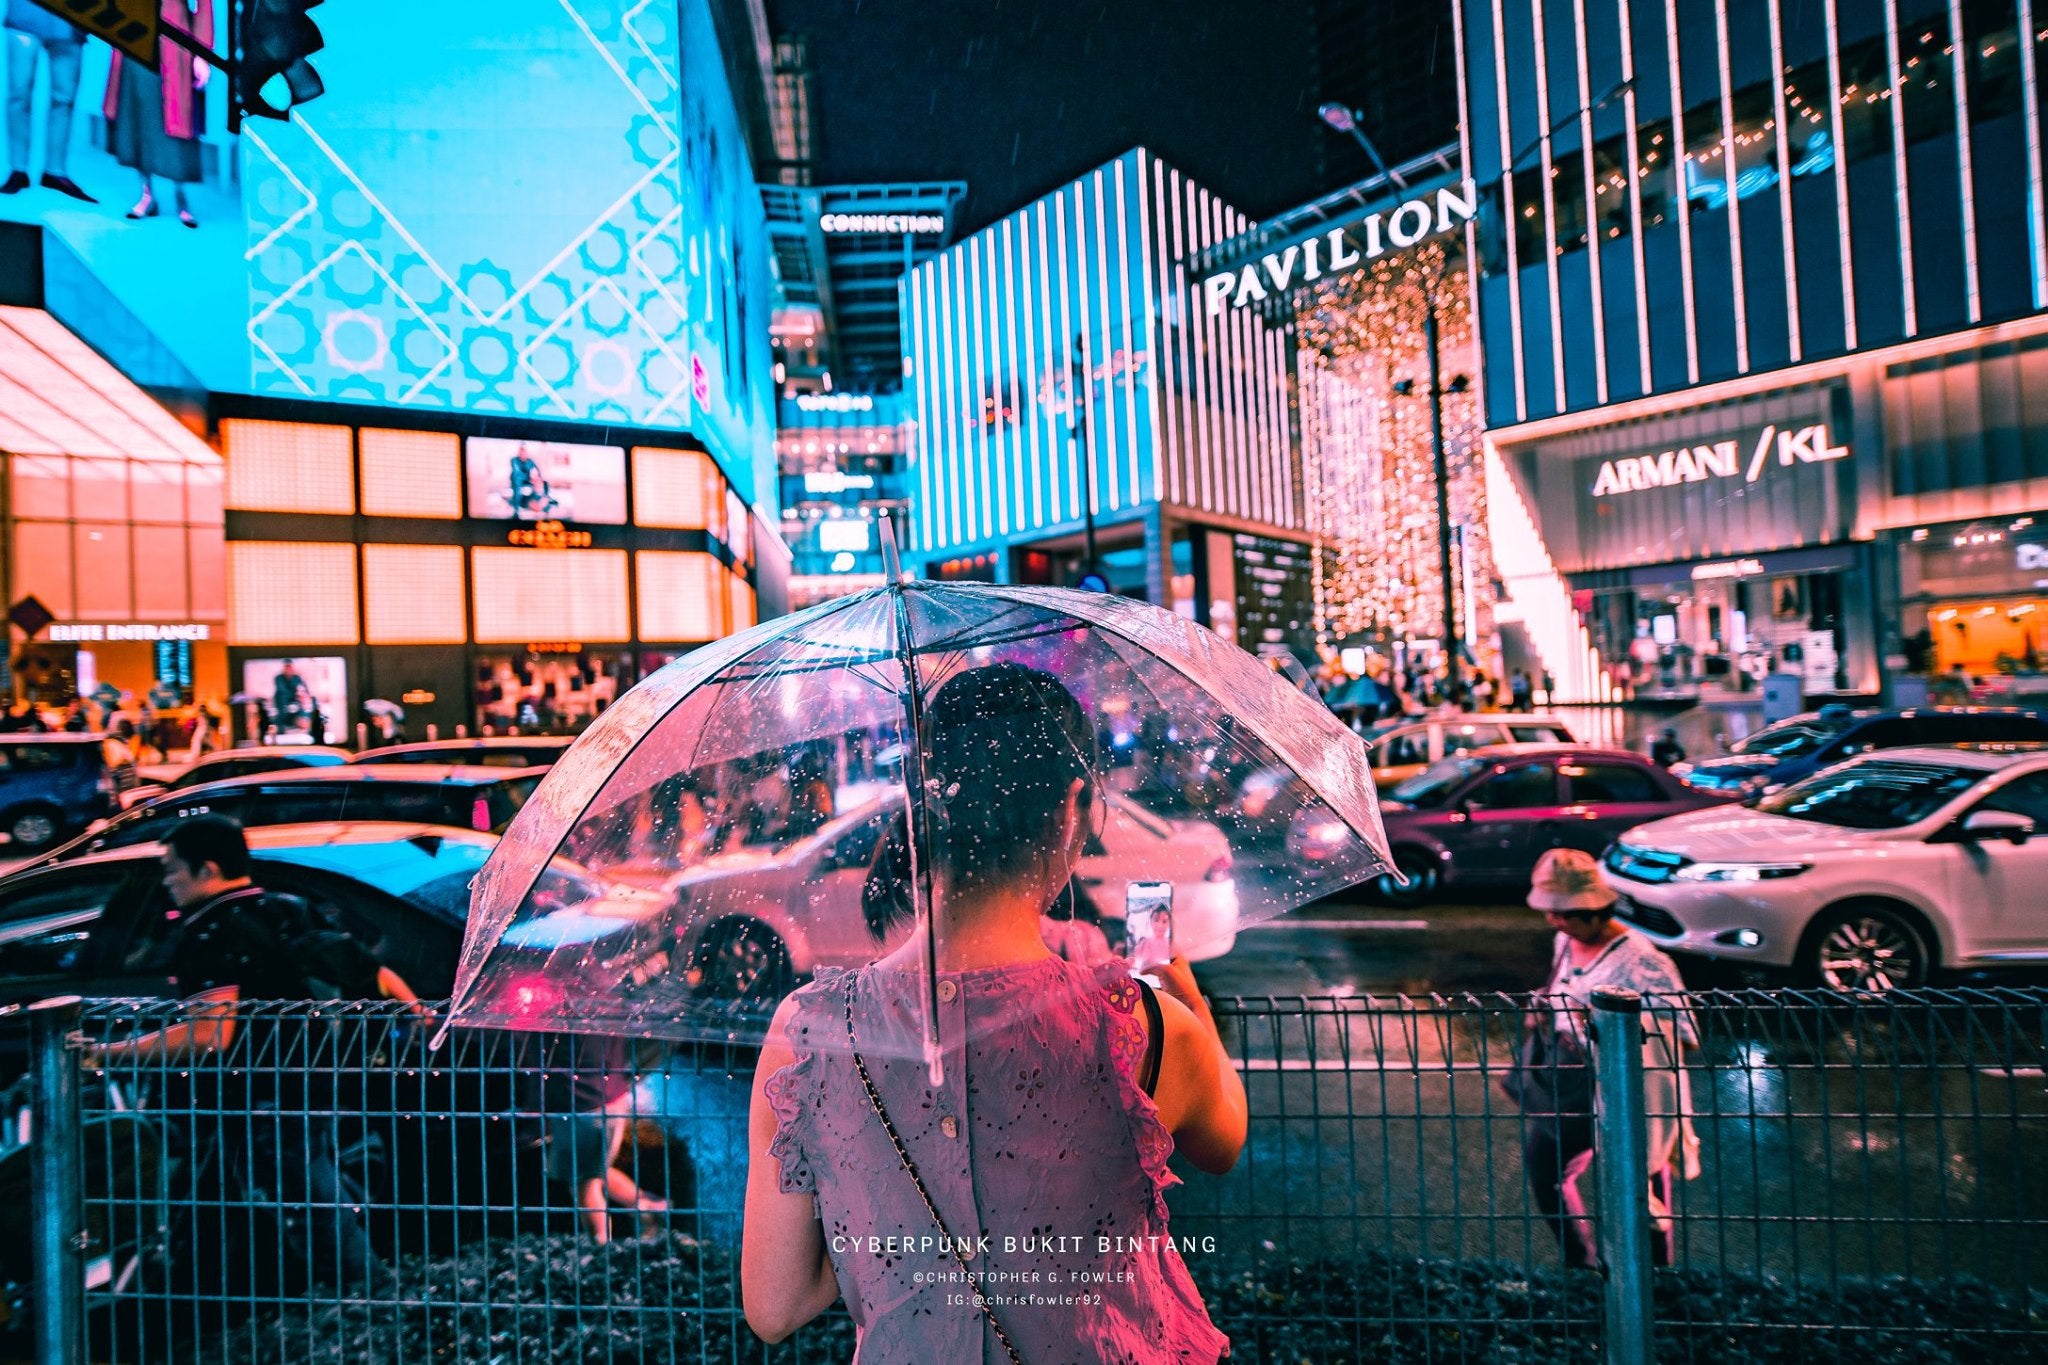 Local Photographer Gives Bukit Bintang a Cyberpunk Twist That's So Good You'd Wish It Was Real Life - WORLD OF BUZZ 1